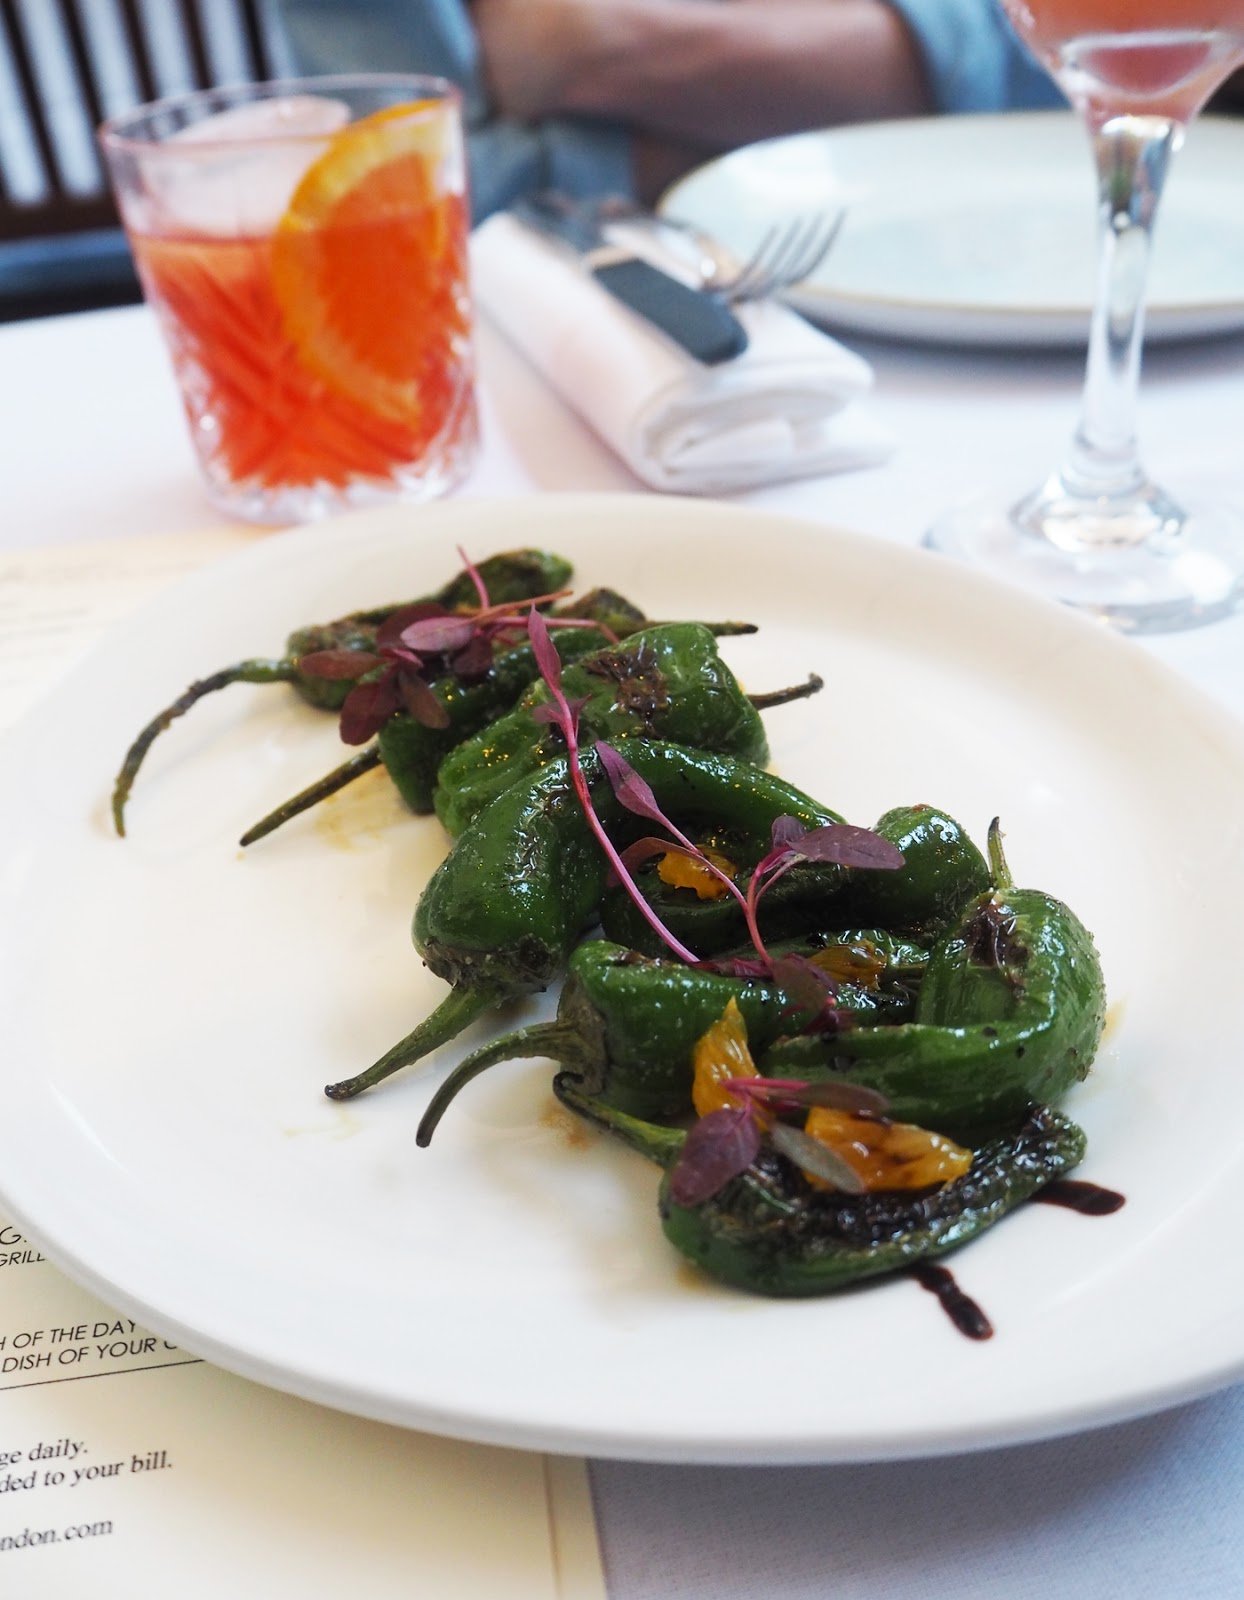 The Artisan Bistro, Padron peppers